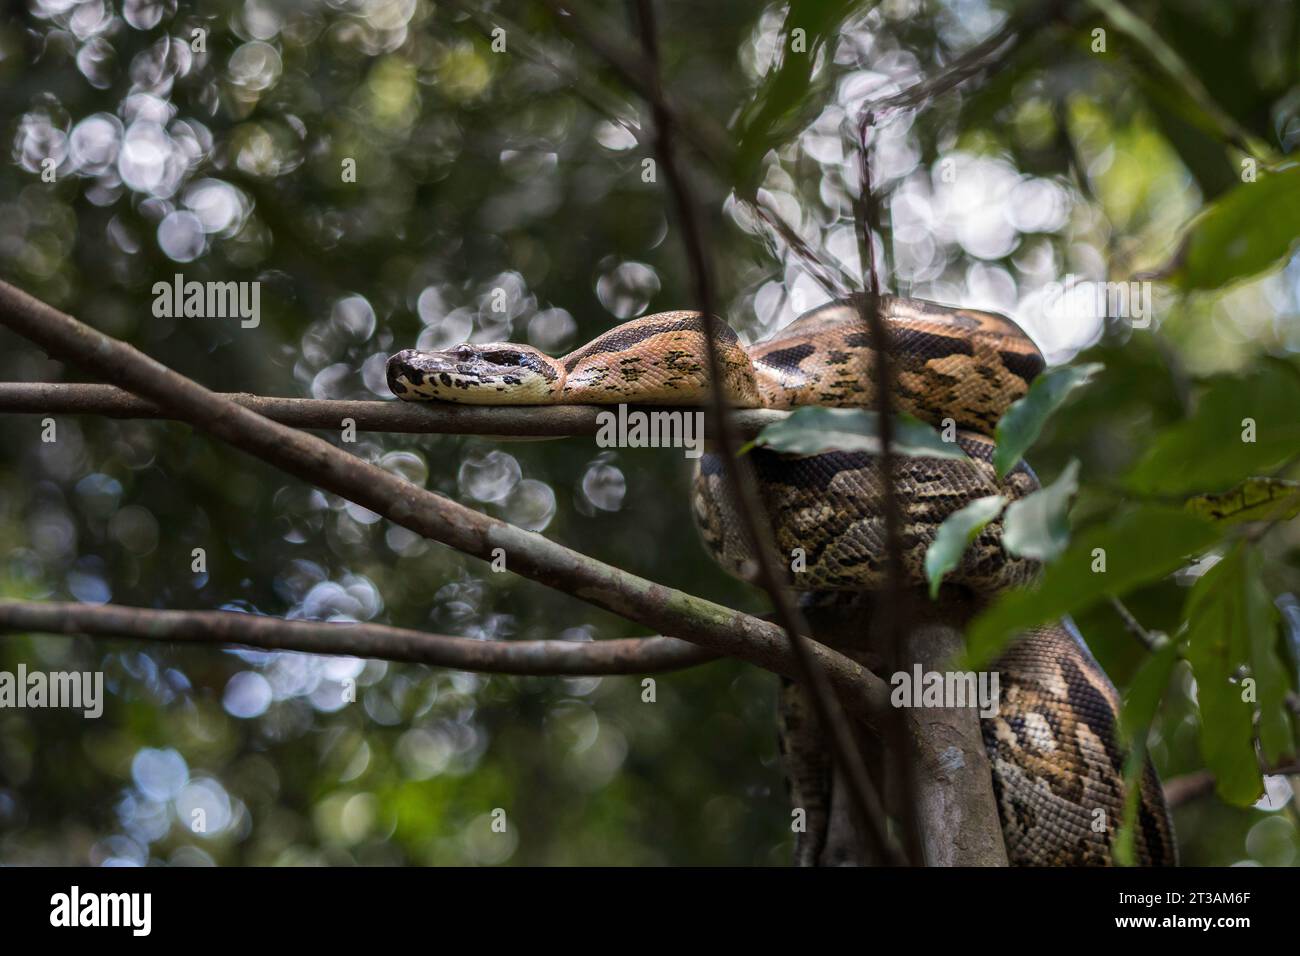 A large Madagascar Ground Boa (Acrantophis madagascariensis) curled up in a tree Stock Photo